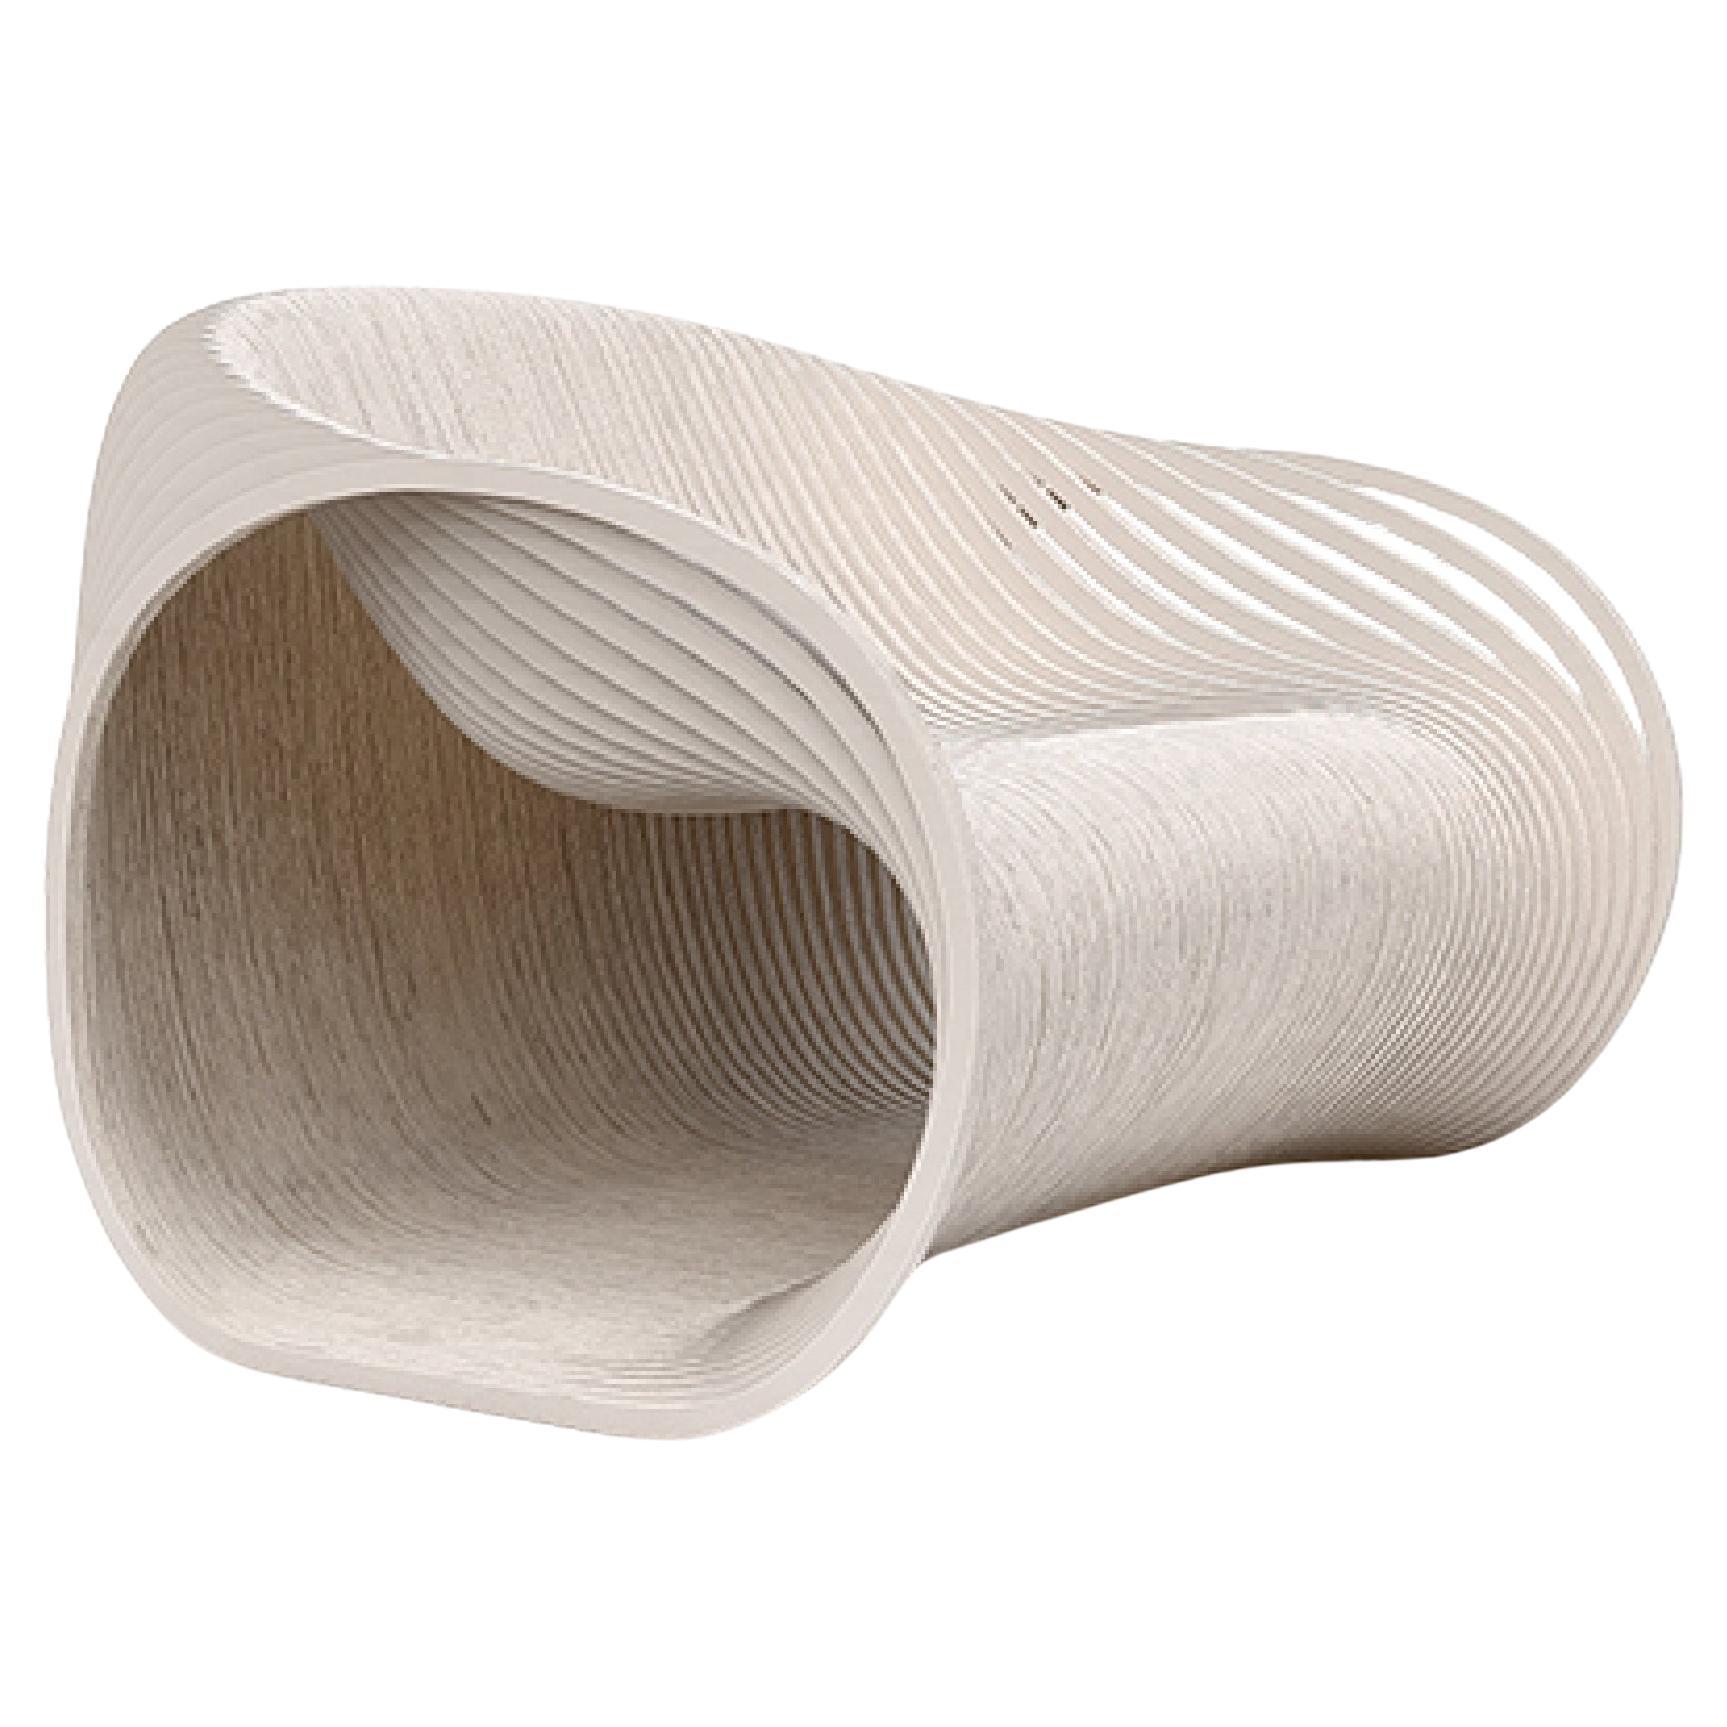 Soave Lounge by Piegatto, a Sculptural Chair For Sale